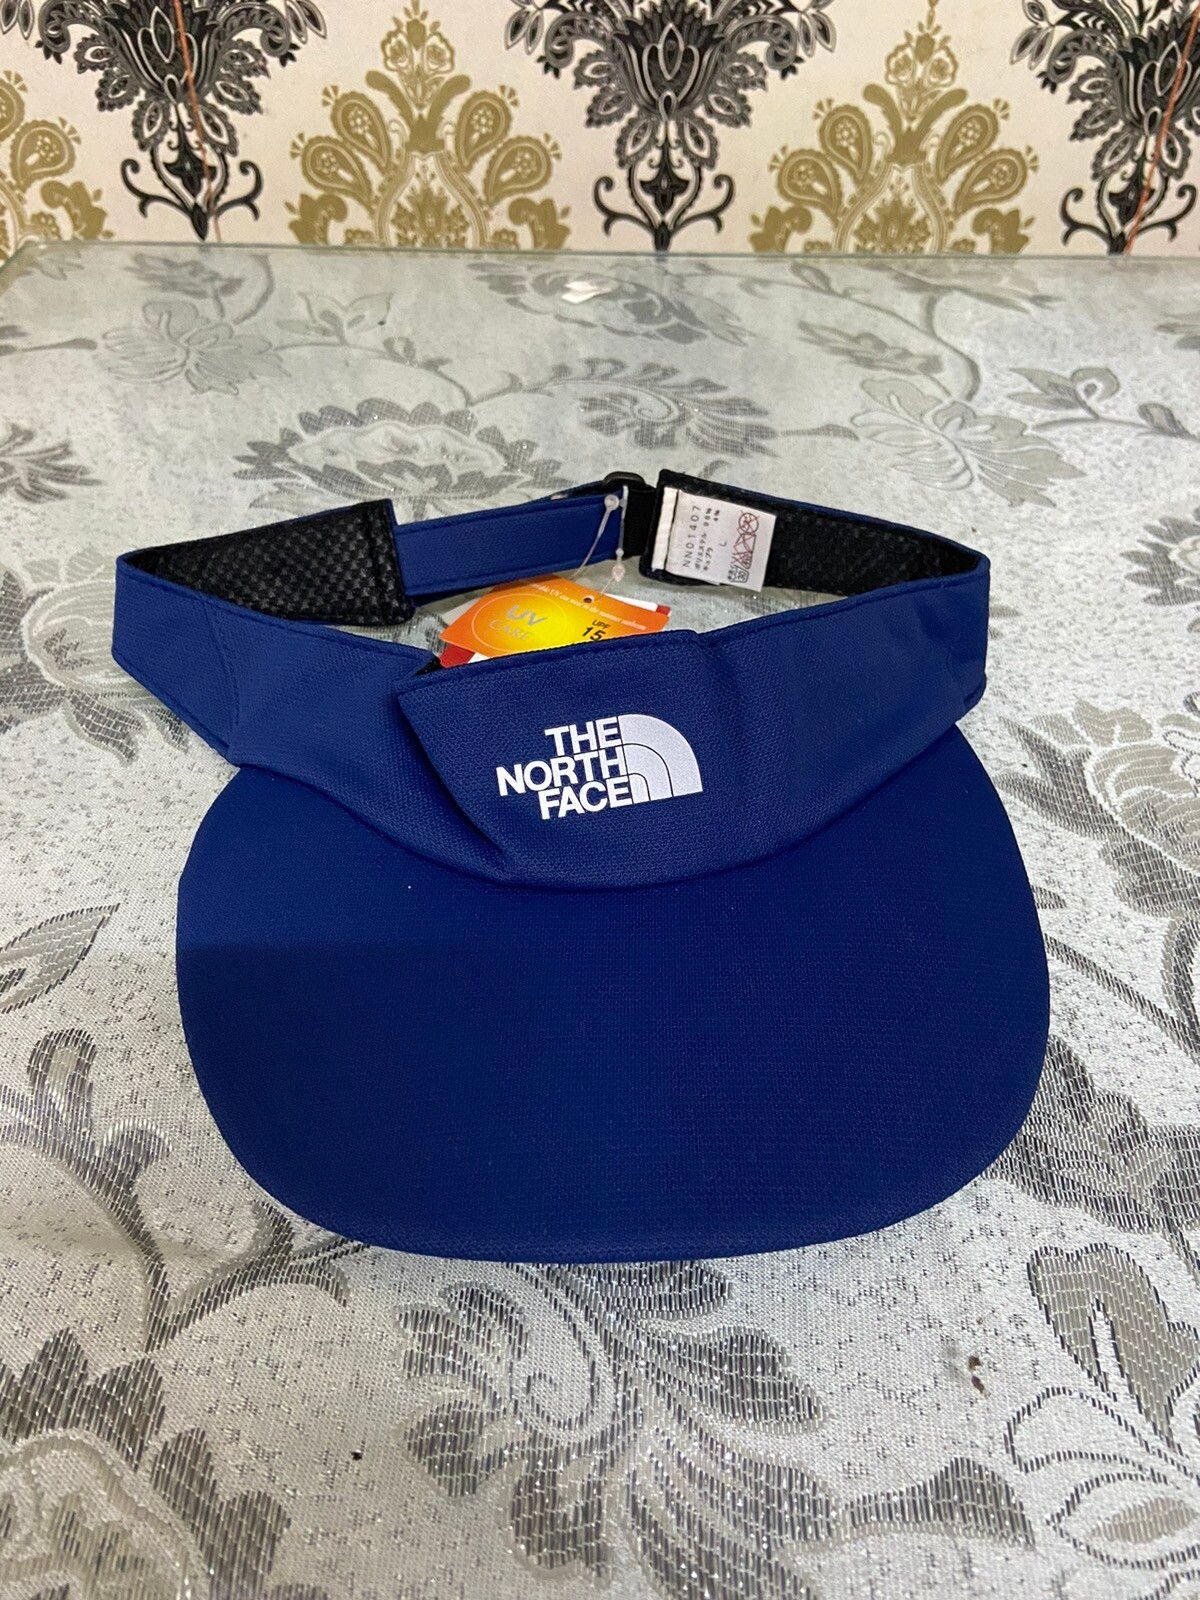 The North Face The North Face Alphadry Visor | Grailed